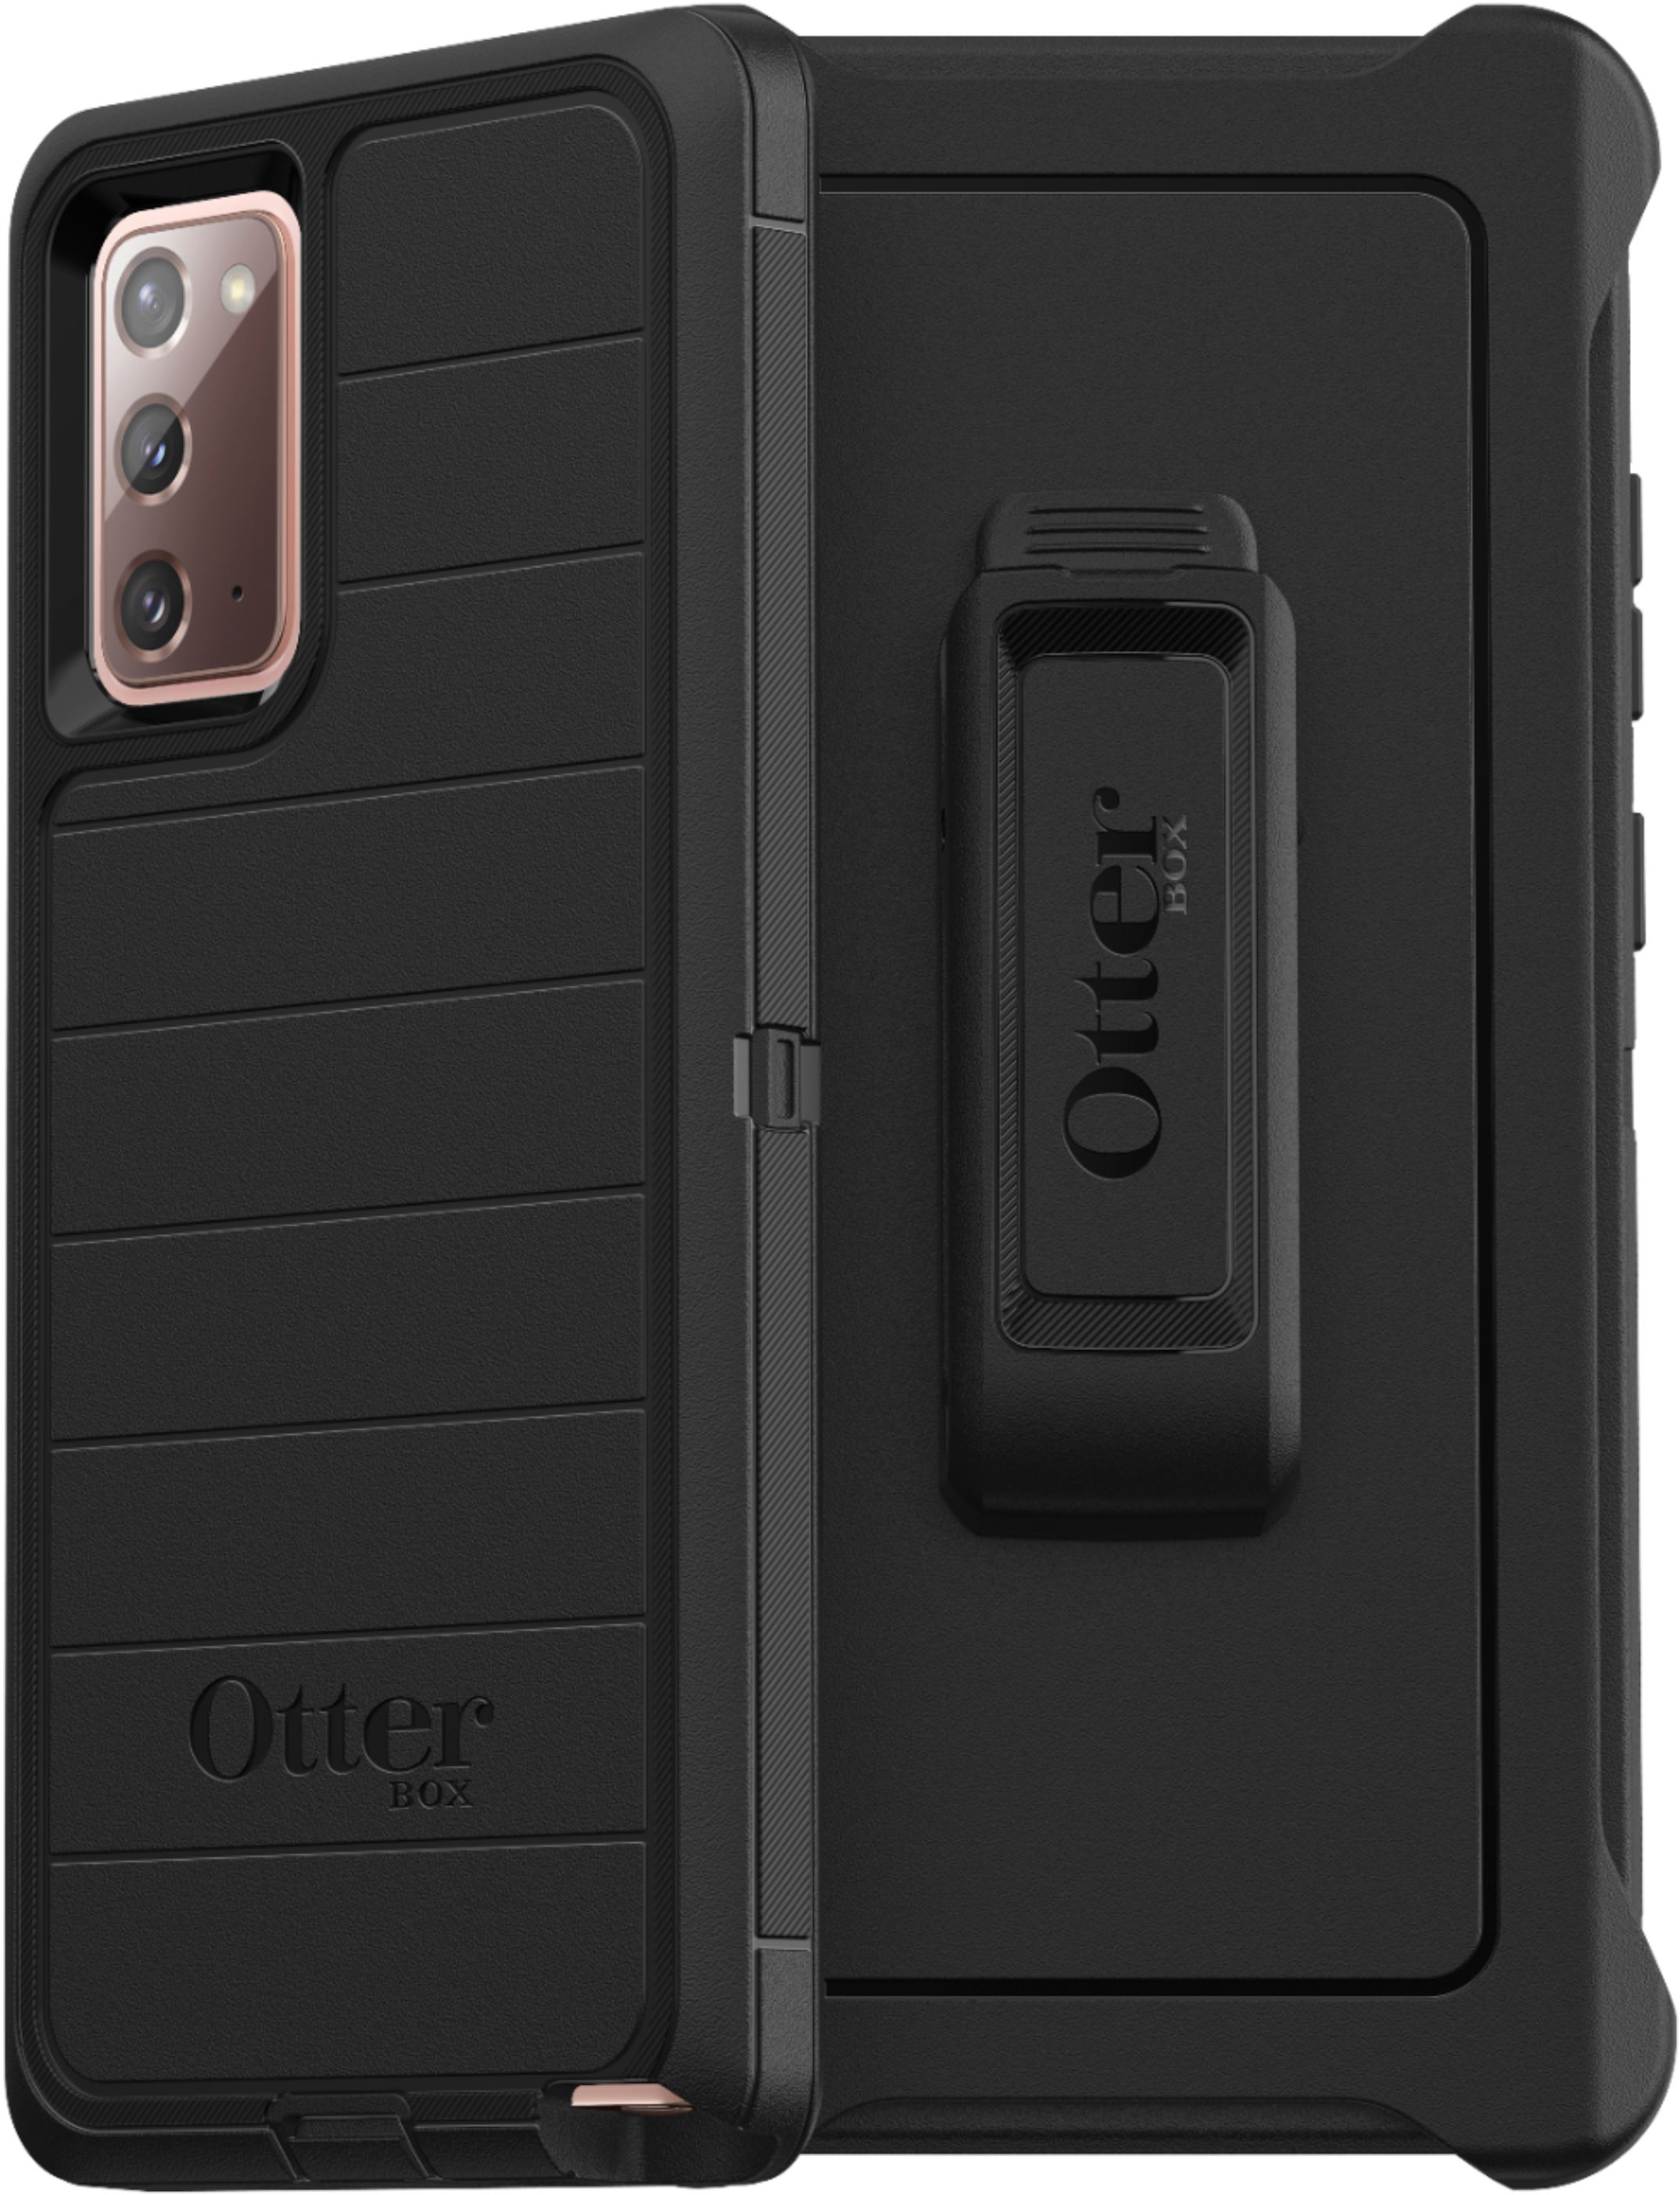 Angle View: OtterBox - Defender Pro Series for Galaxy Note20 5G - Black